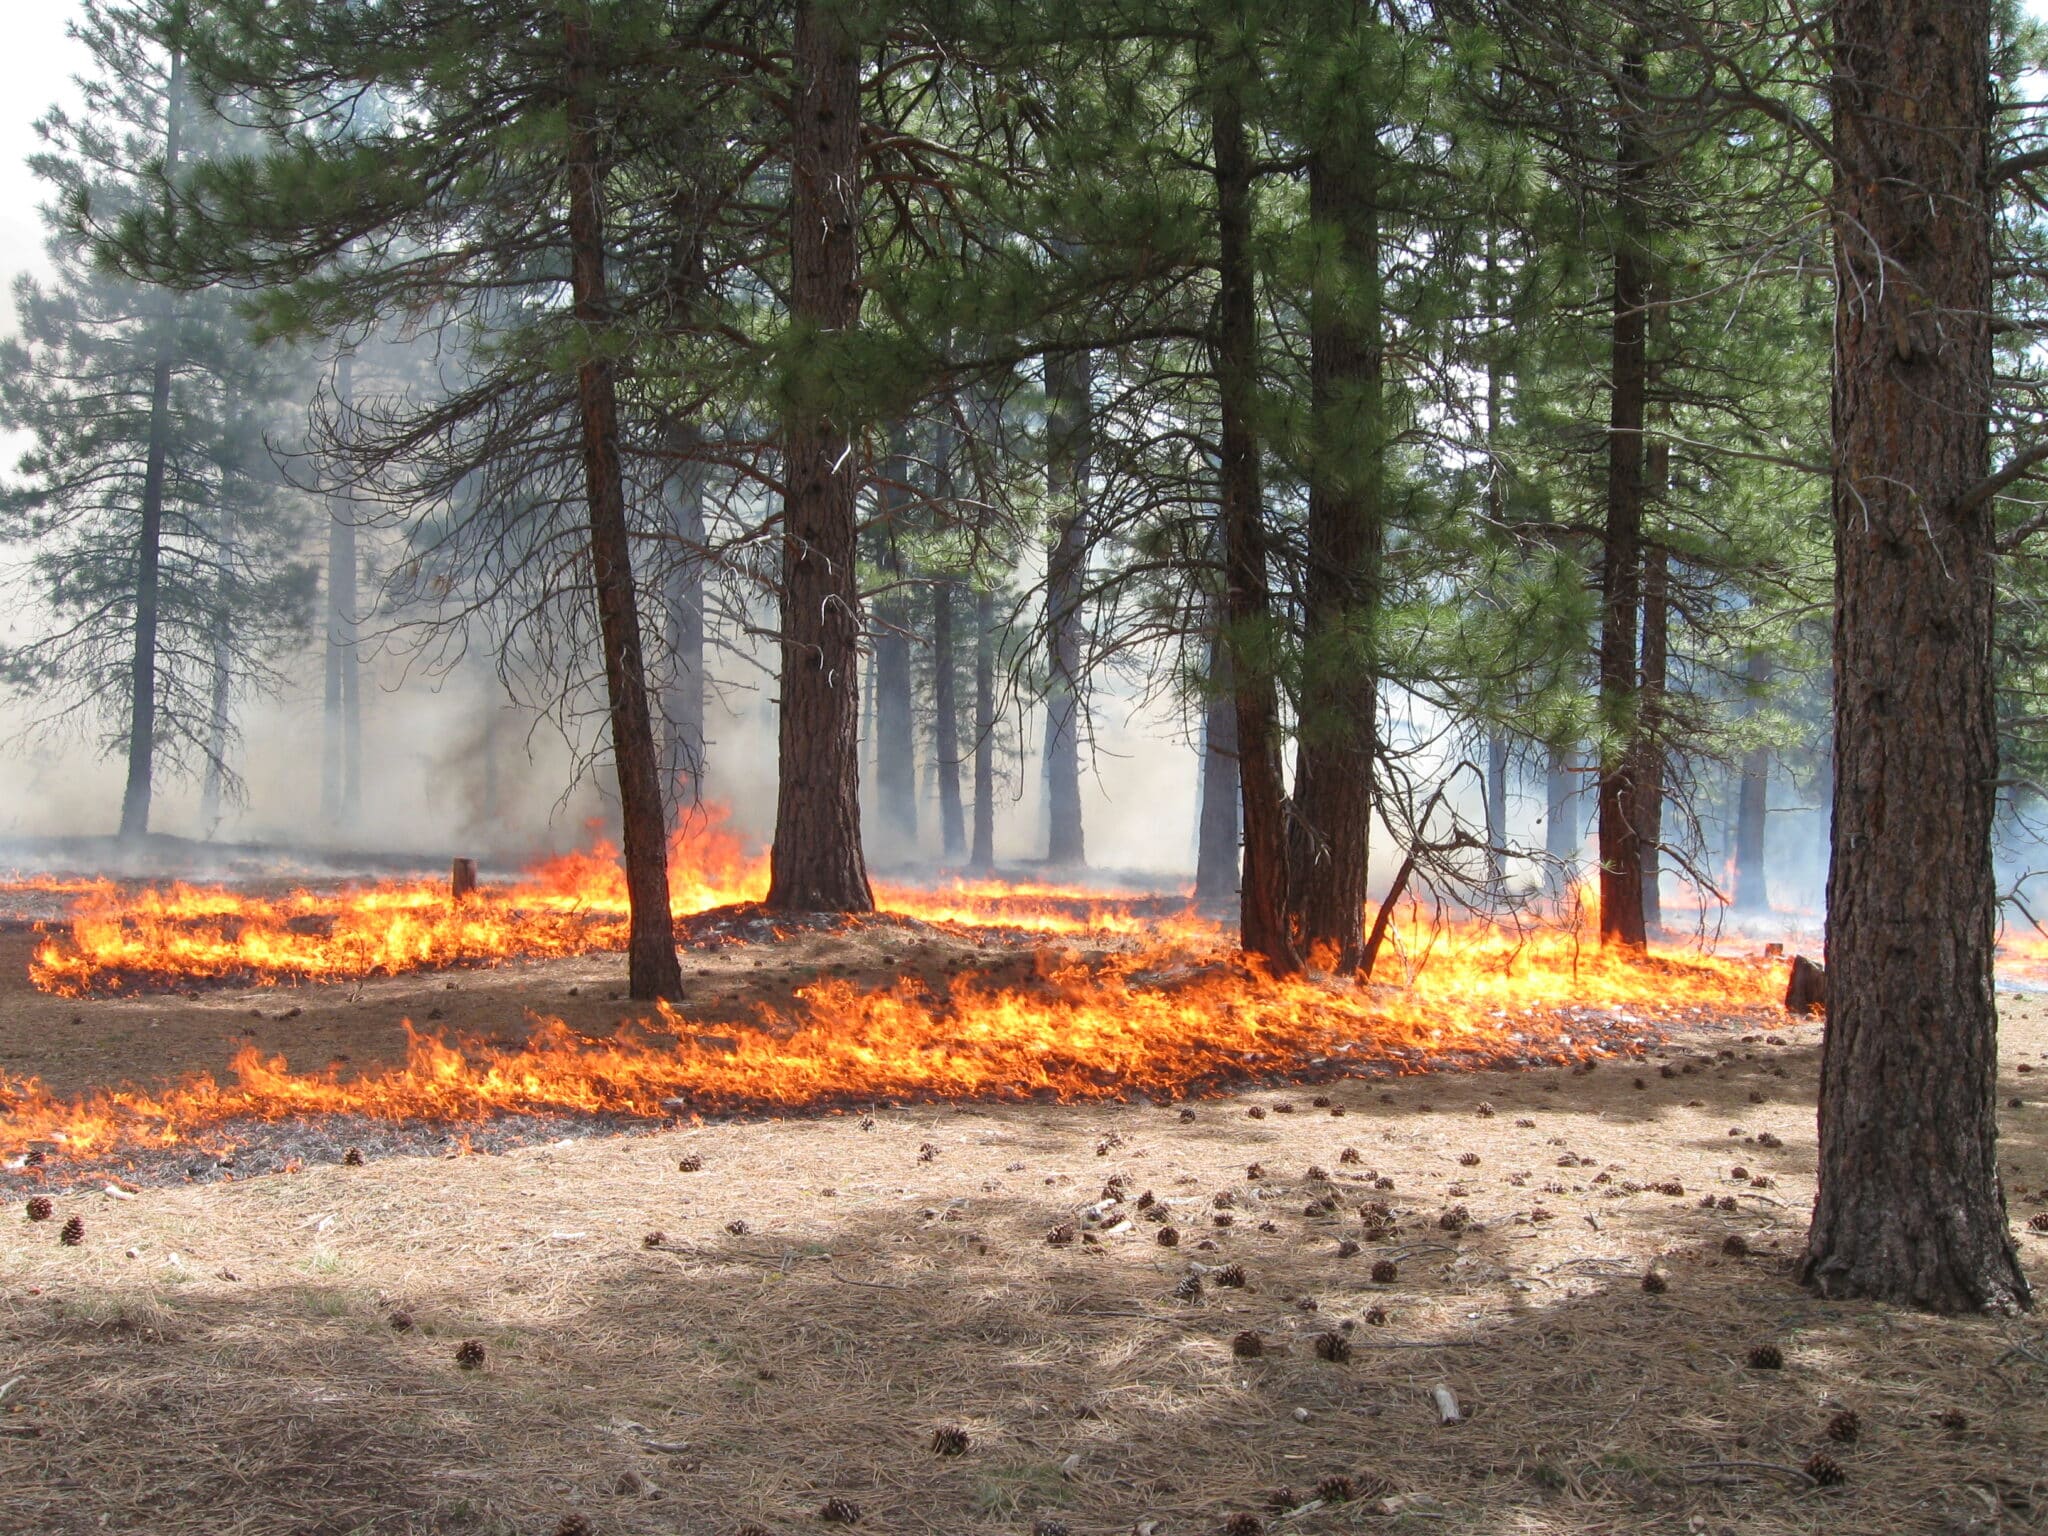 A prescribed burn in a forest